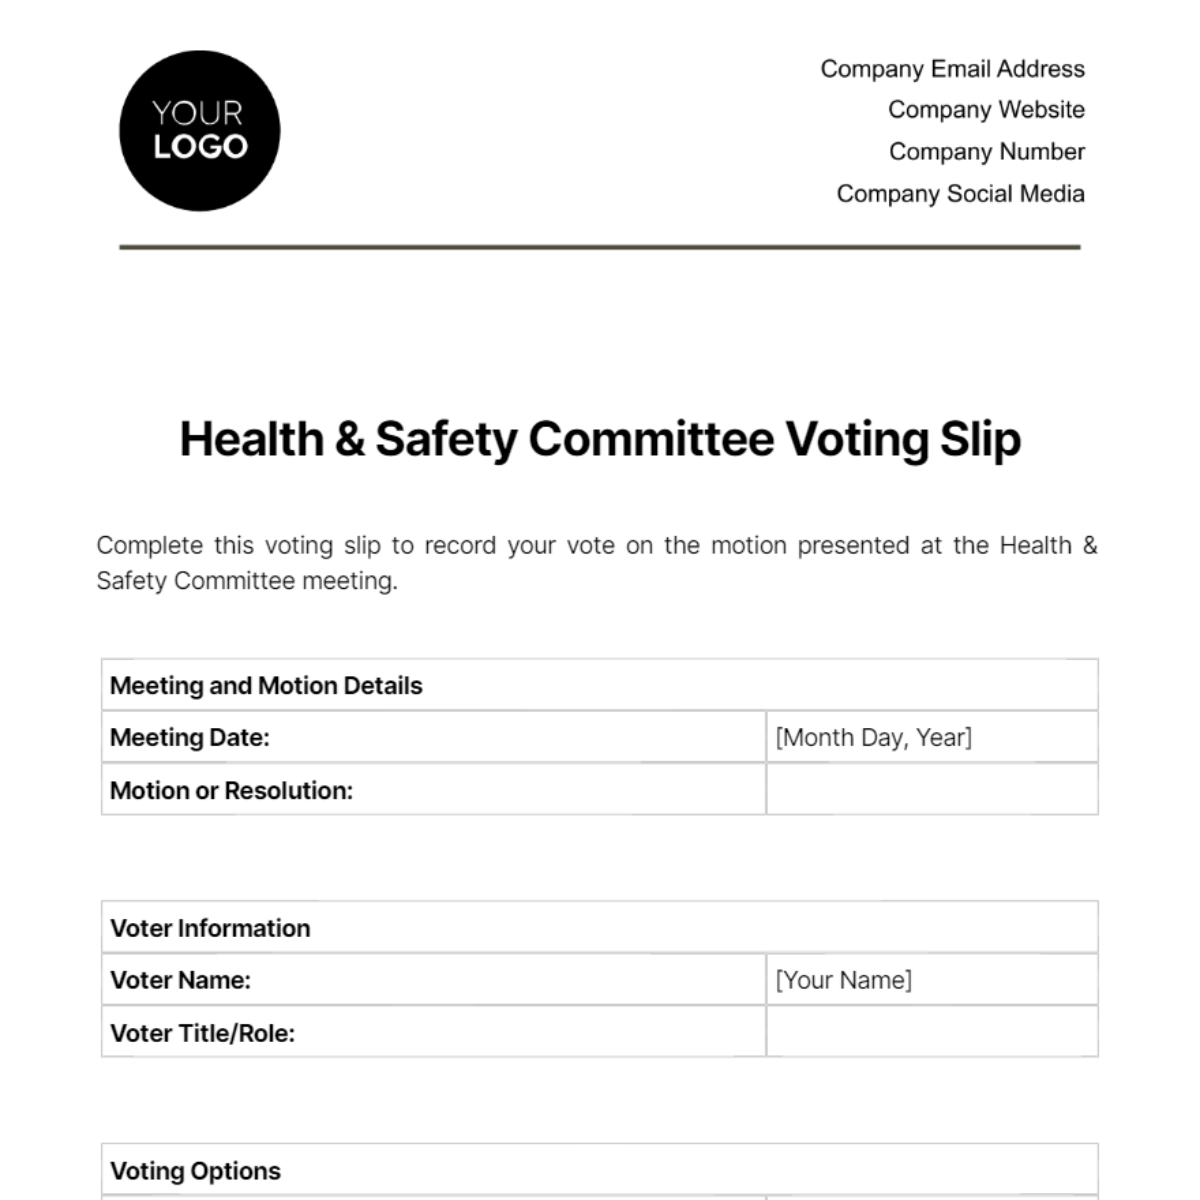 Health & Safety Committee Voting Slip Template